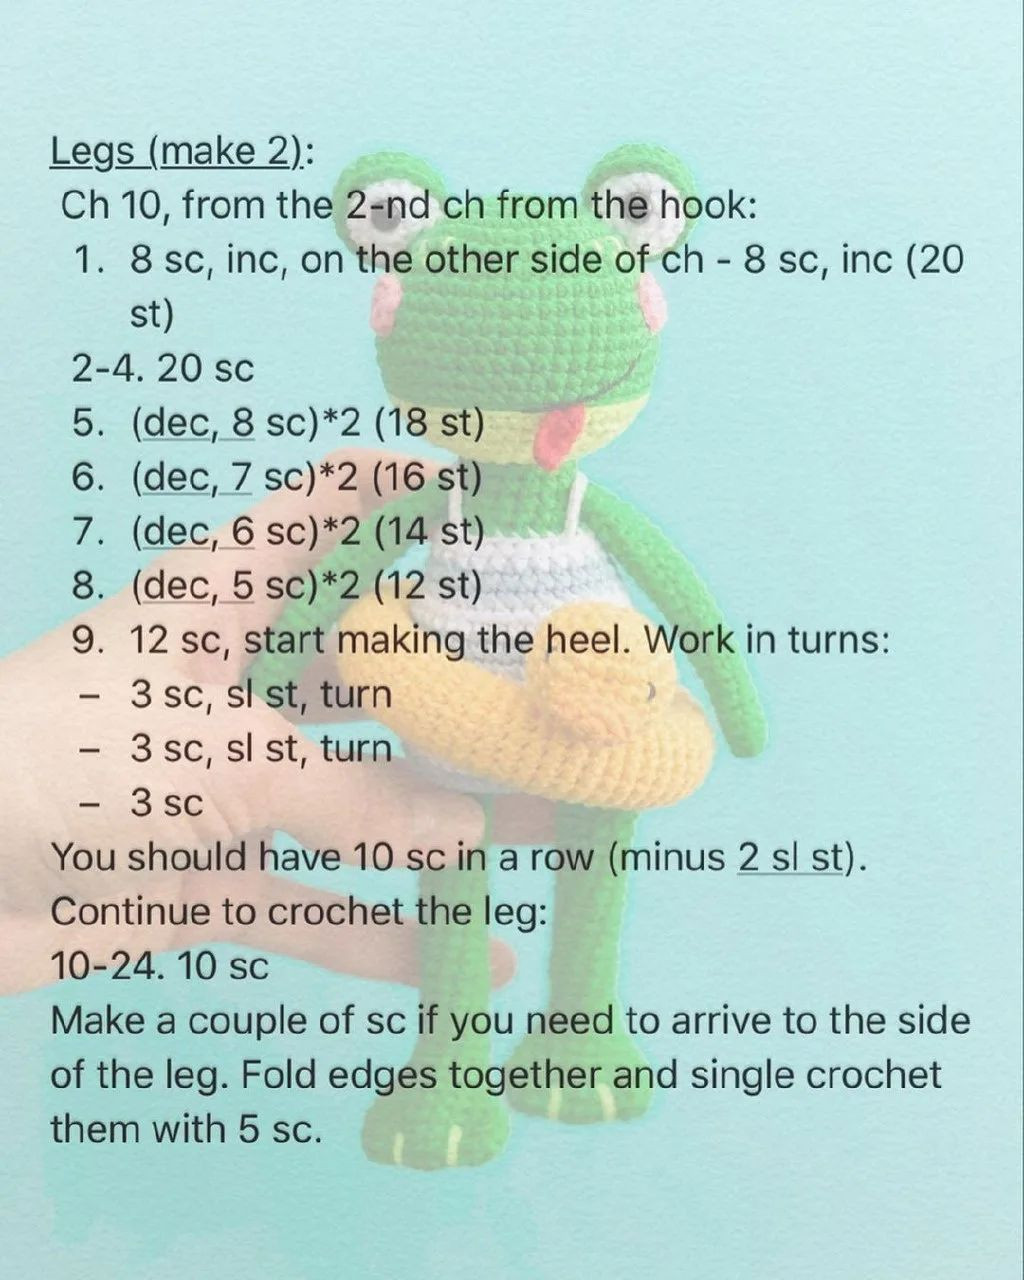 Green frog crochet pattern with bulging eyes for swimming.